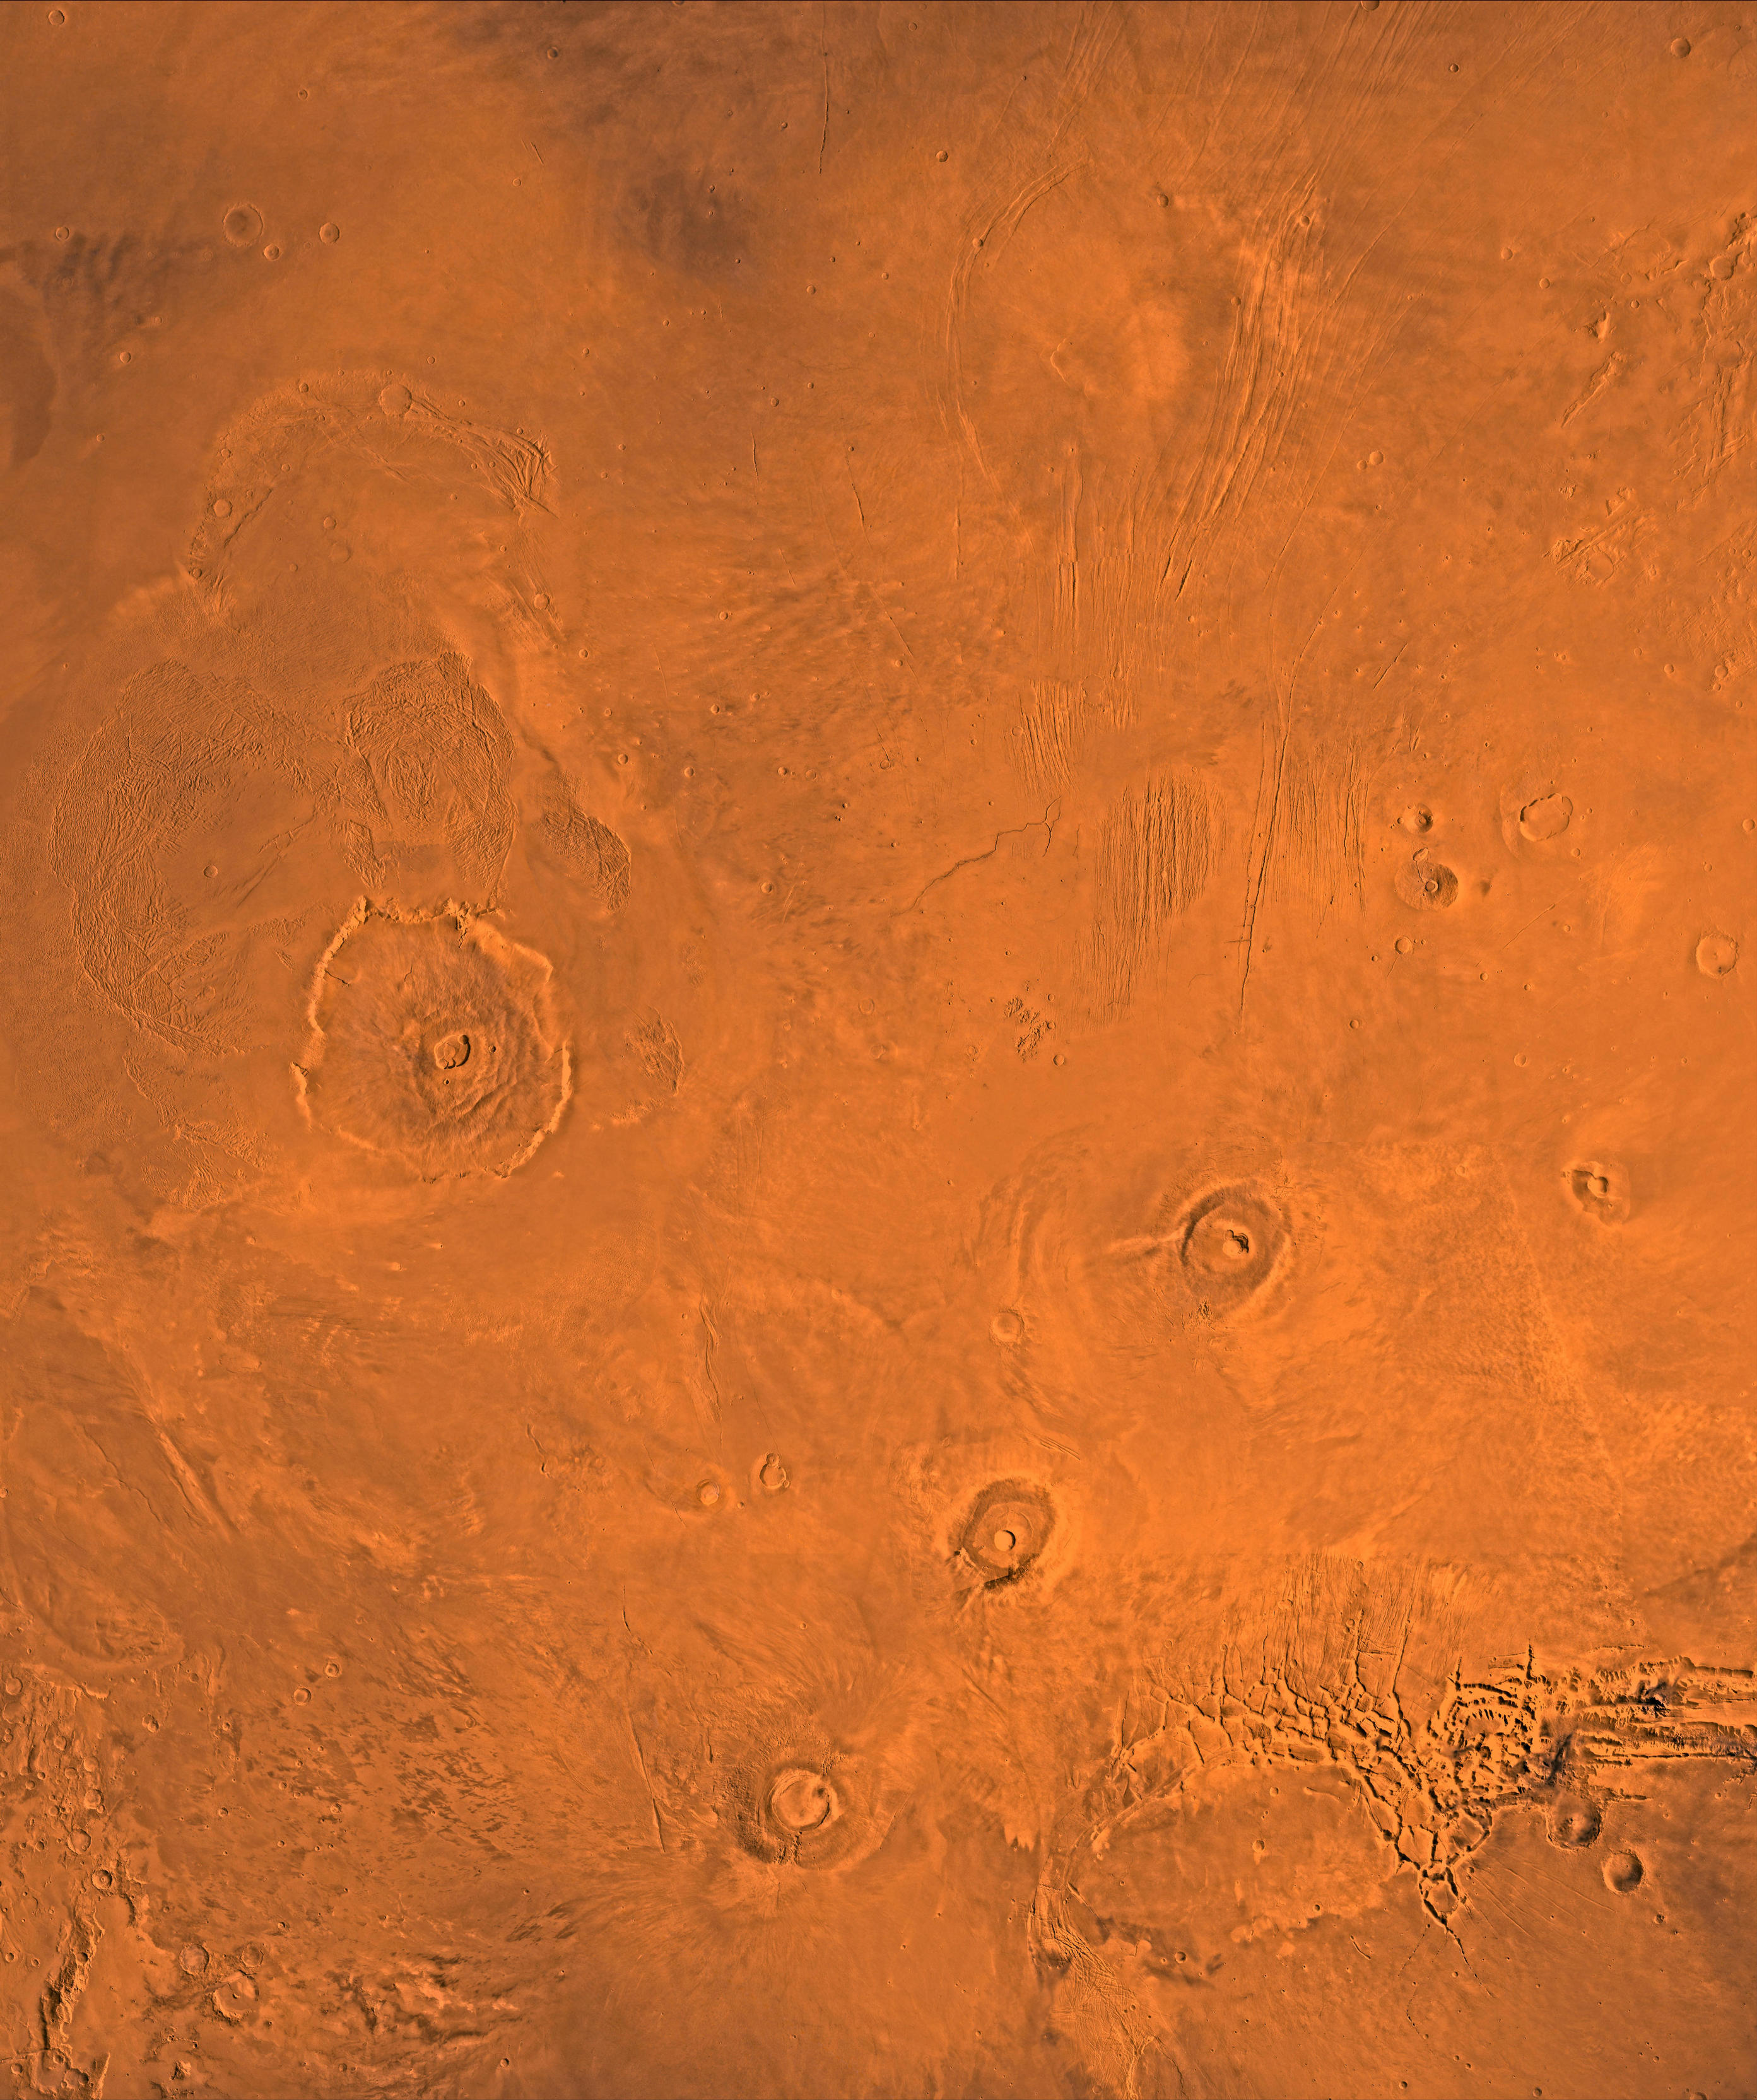 This is a close-up image of the Tharsis volcano.